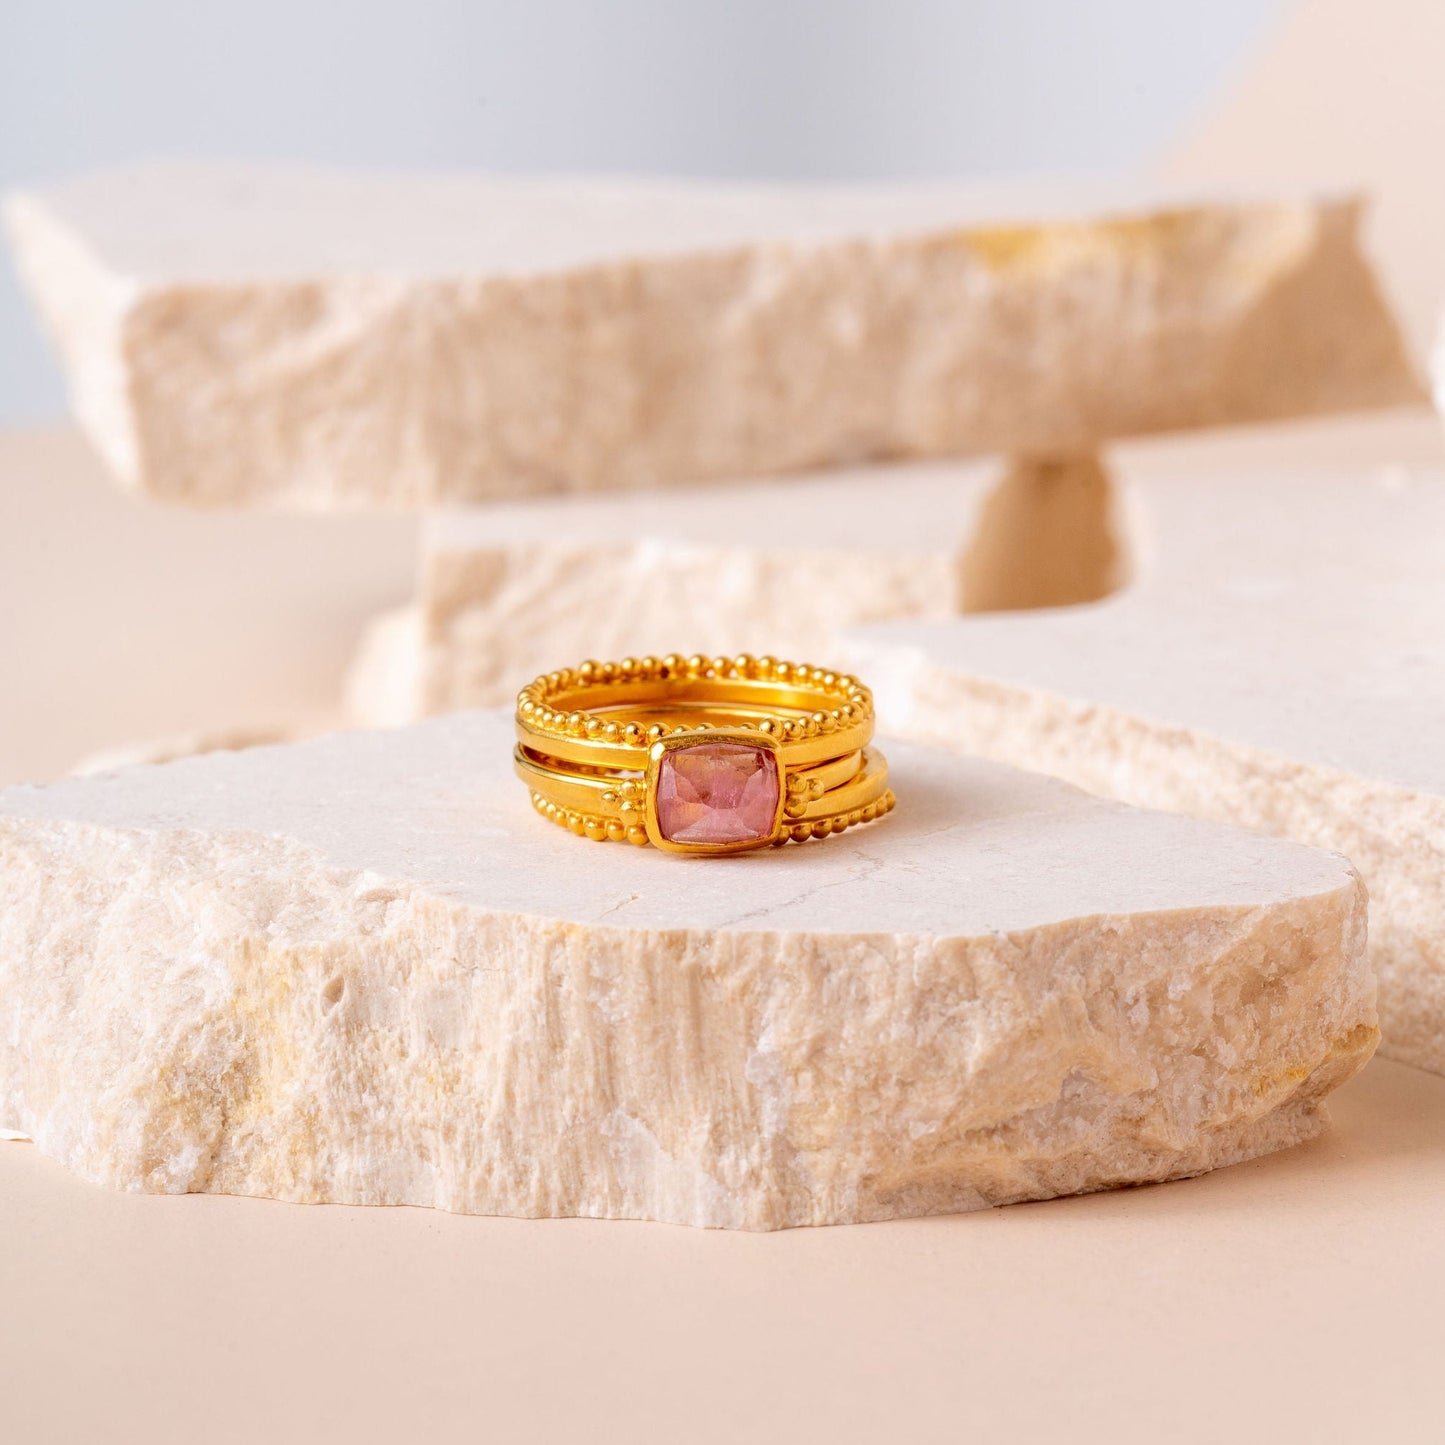 Elegantly crafted gold ring with delicate granulation and a small light pink tourmaline.